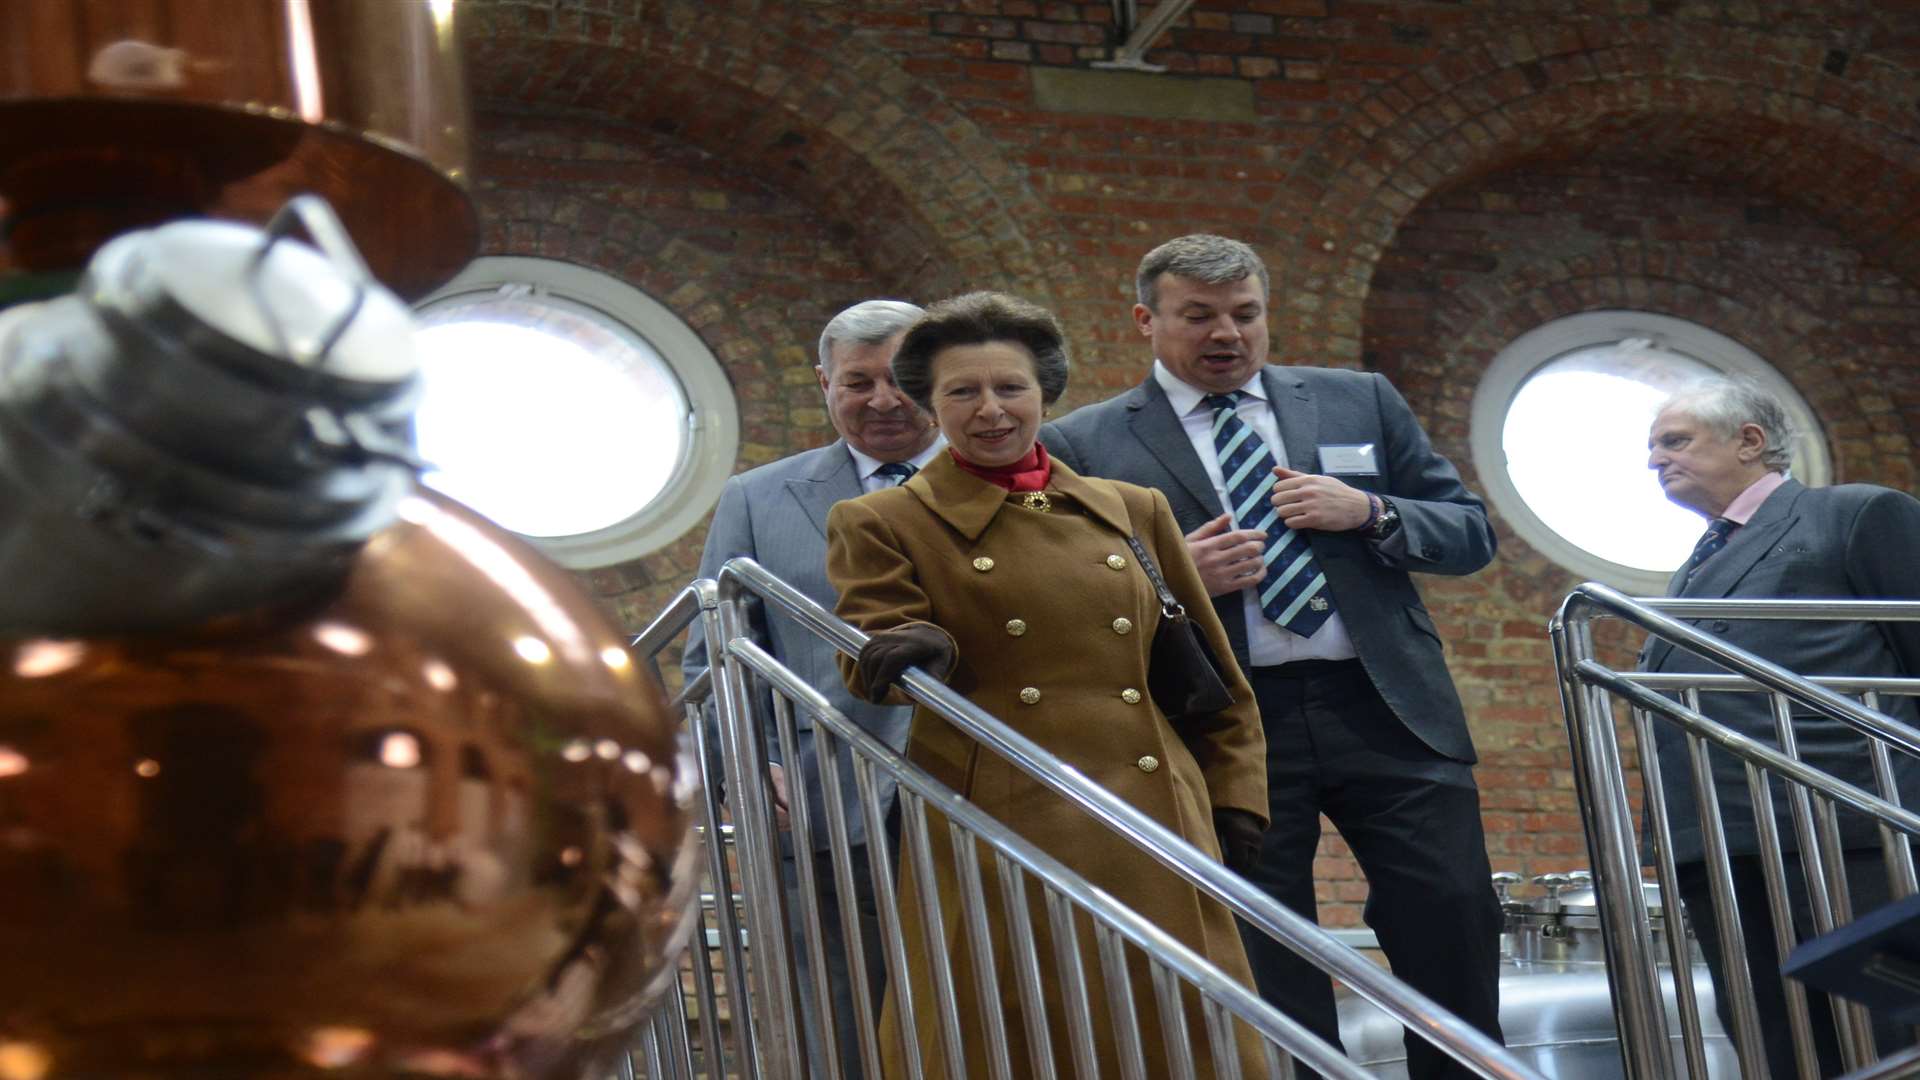 Matthew and Bob Russel showing Her Royal Highness around the distillery.